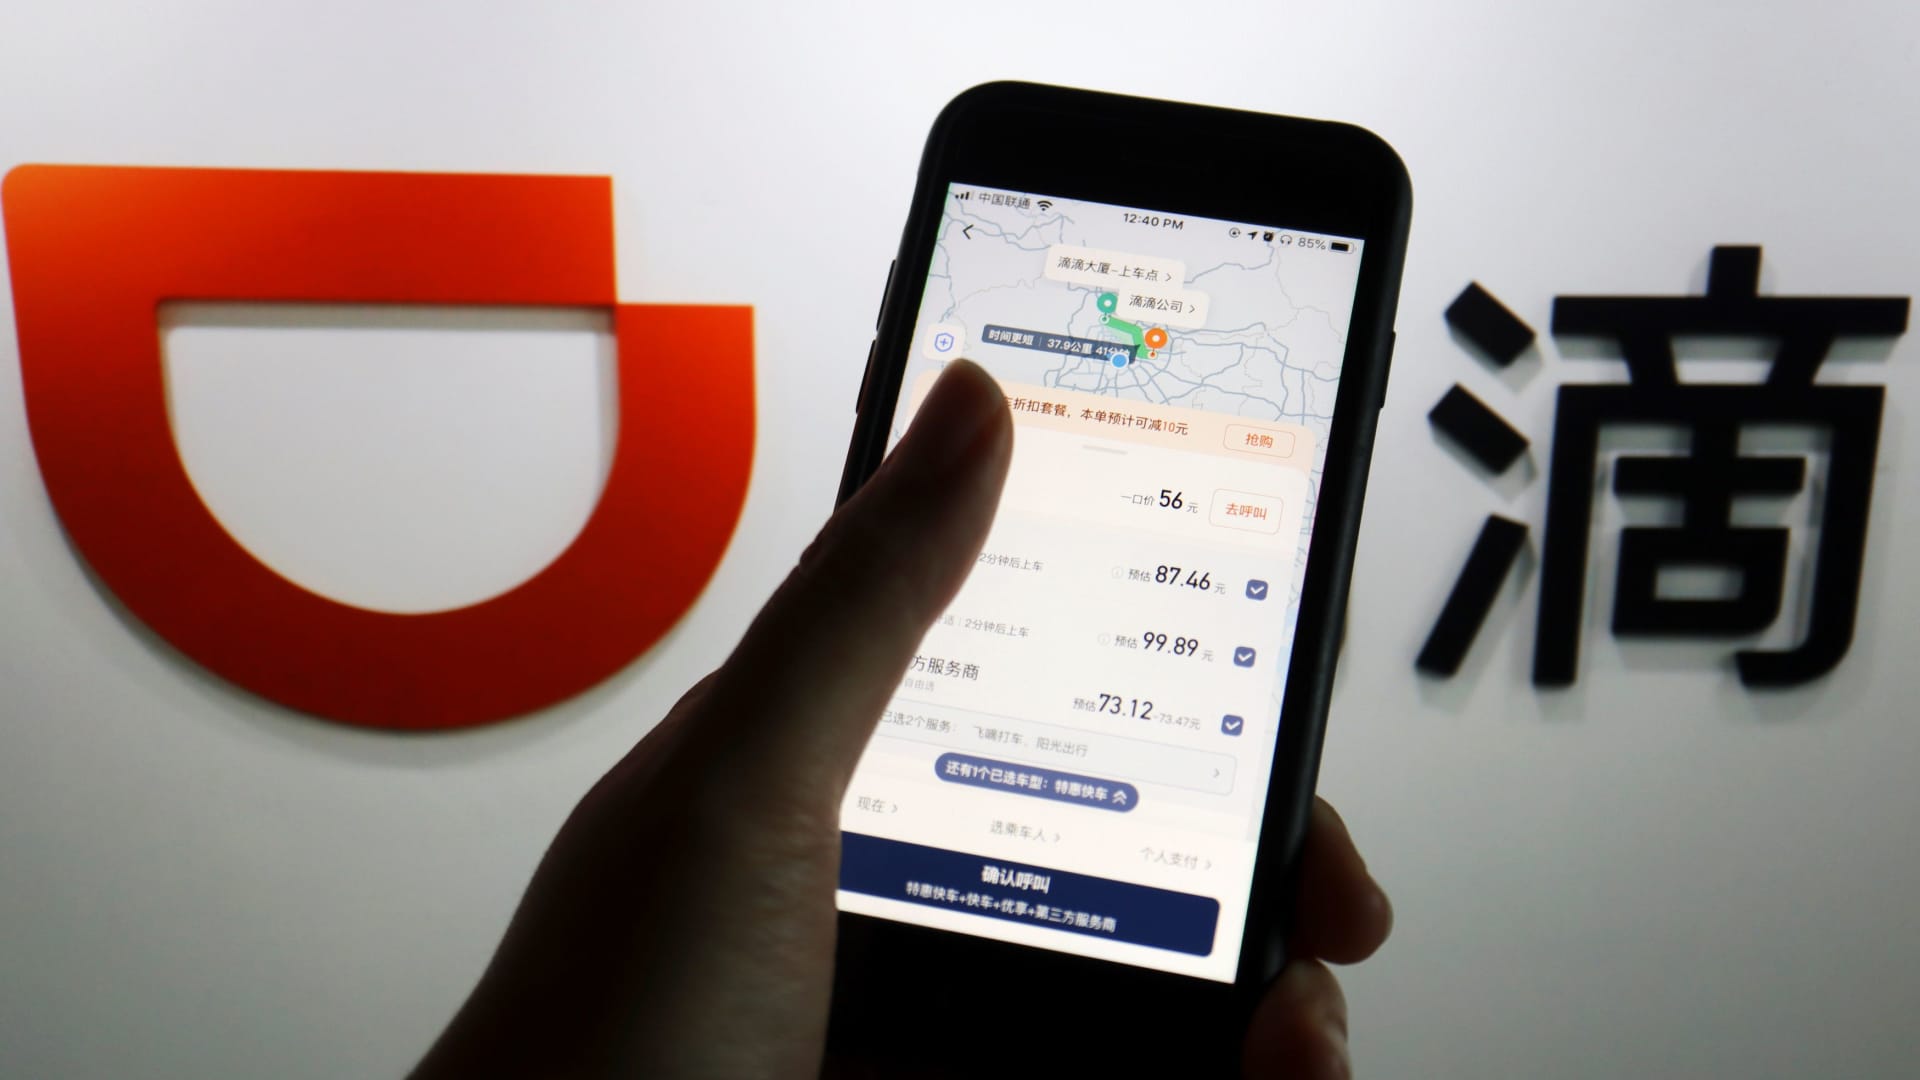 China fines Didi more than $ 1 billion for violating computer security laws